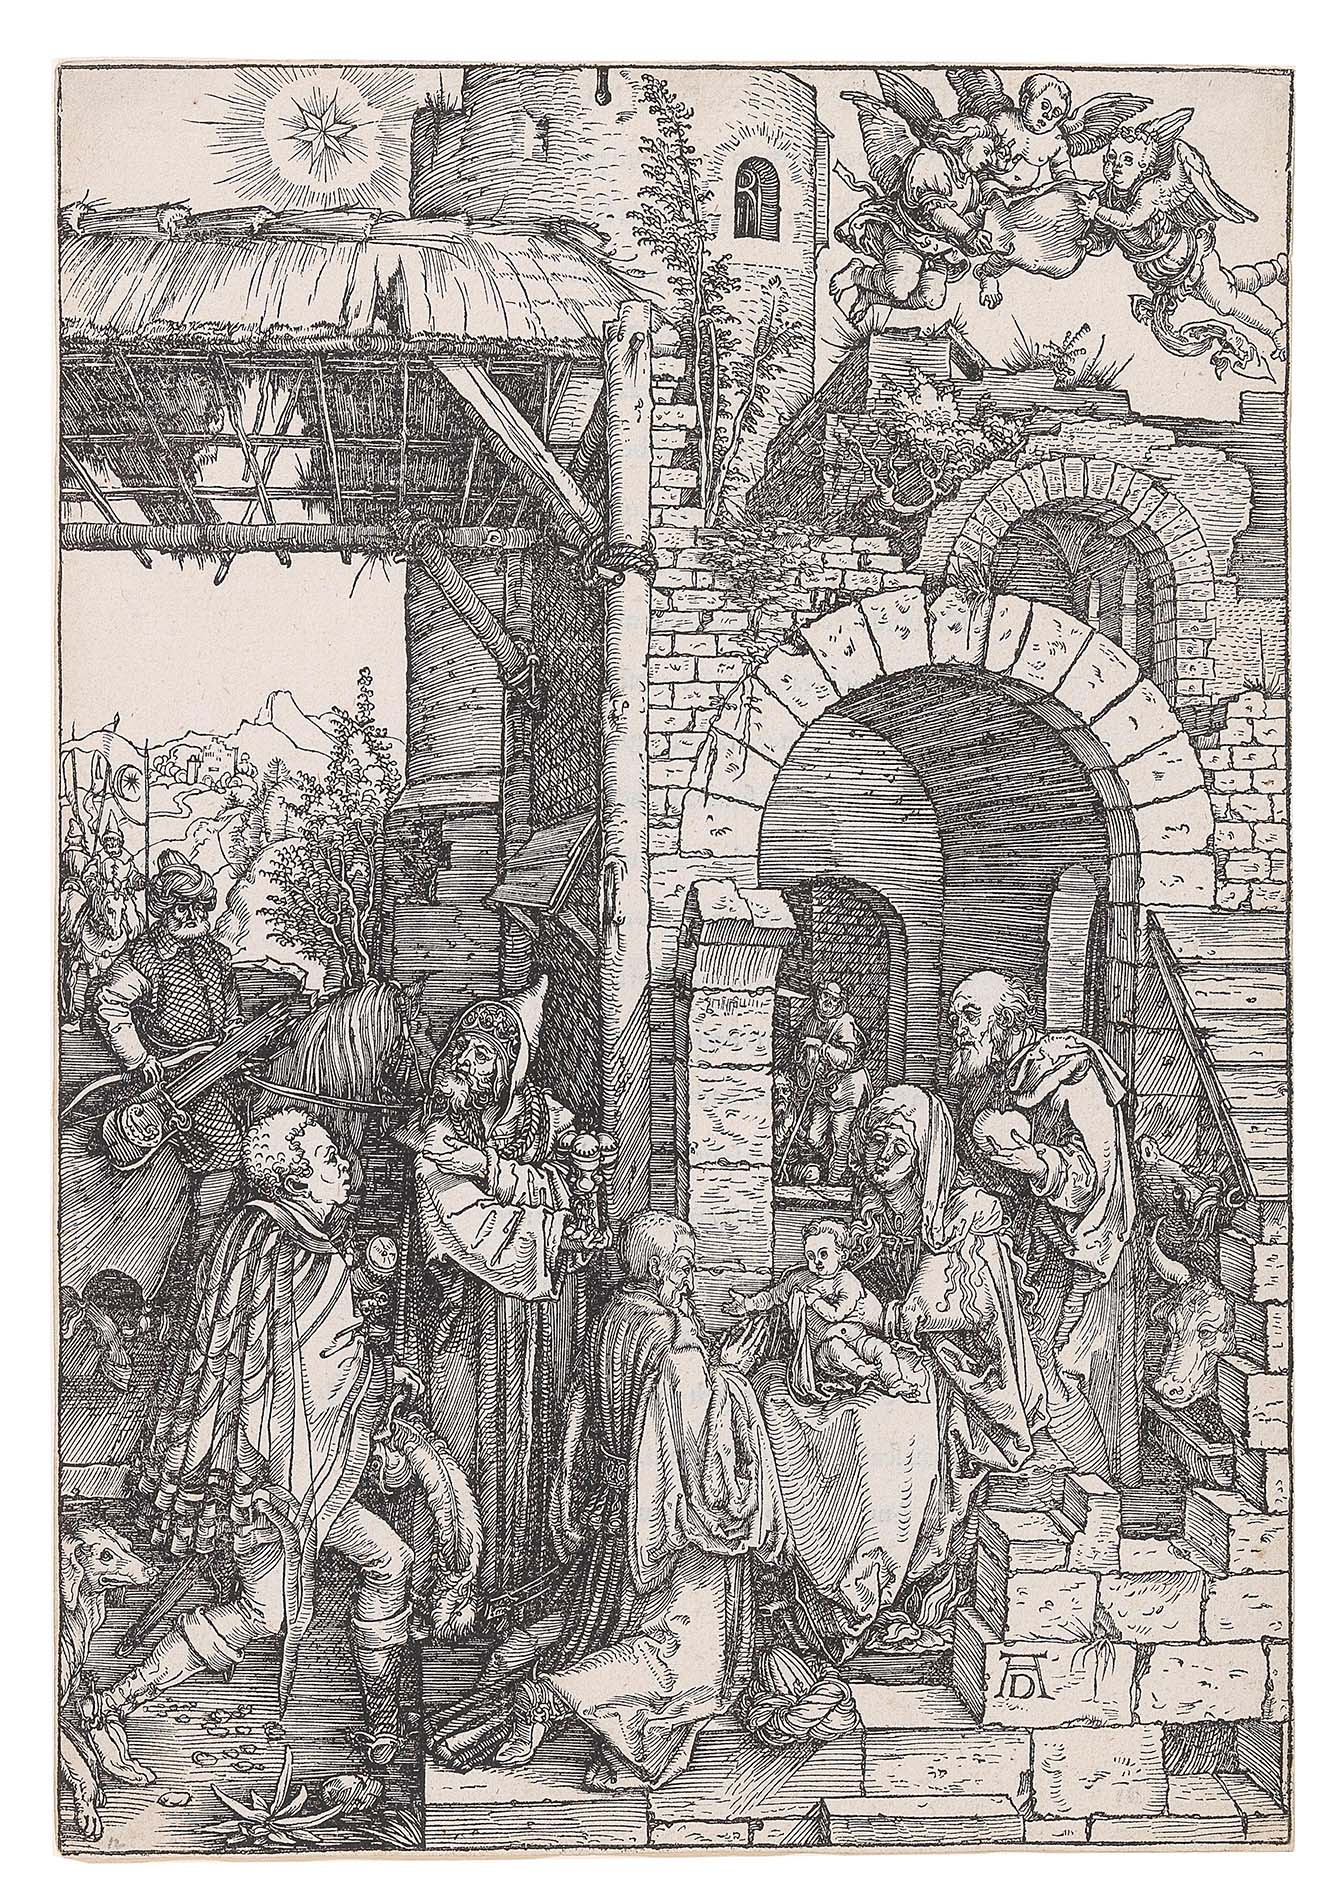 Albrecht Dürer, (Nuremberg 1471–1528) The Adoration of the Magi, c. 1503, plate 12 from “The Life of the Virgin”, monogrammed AD, woodcut on laid paper with watermark „tower with crown on top” (Meder 259), 30,2 x 21 cm, Starting bid €4,000